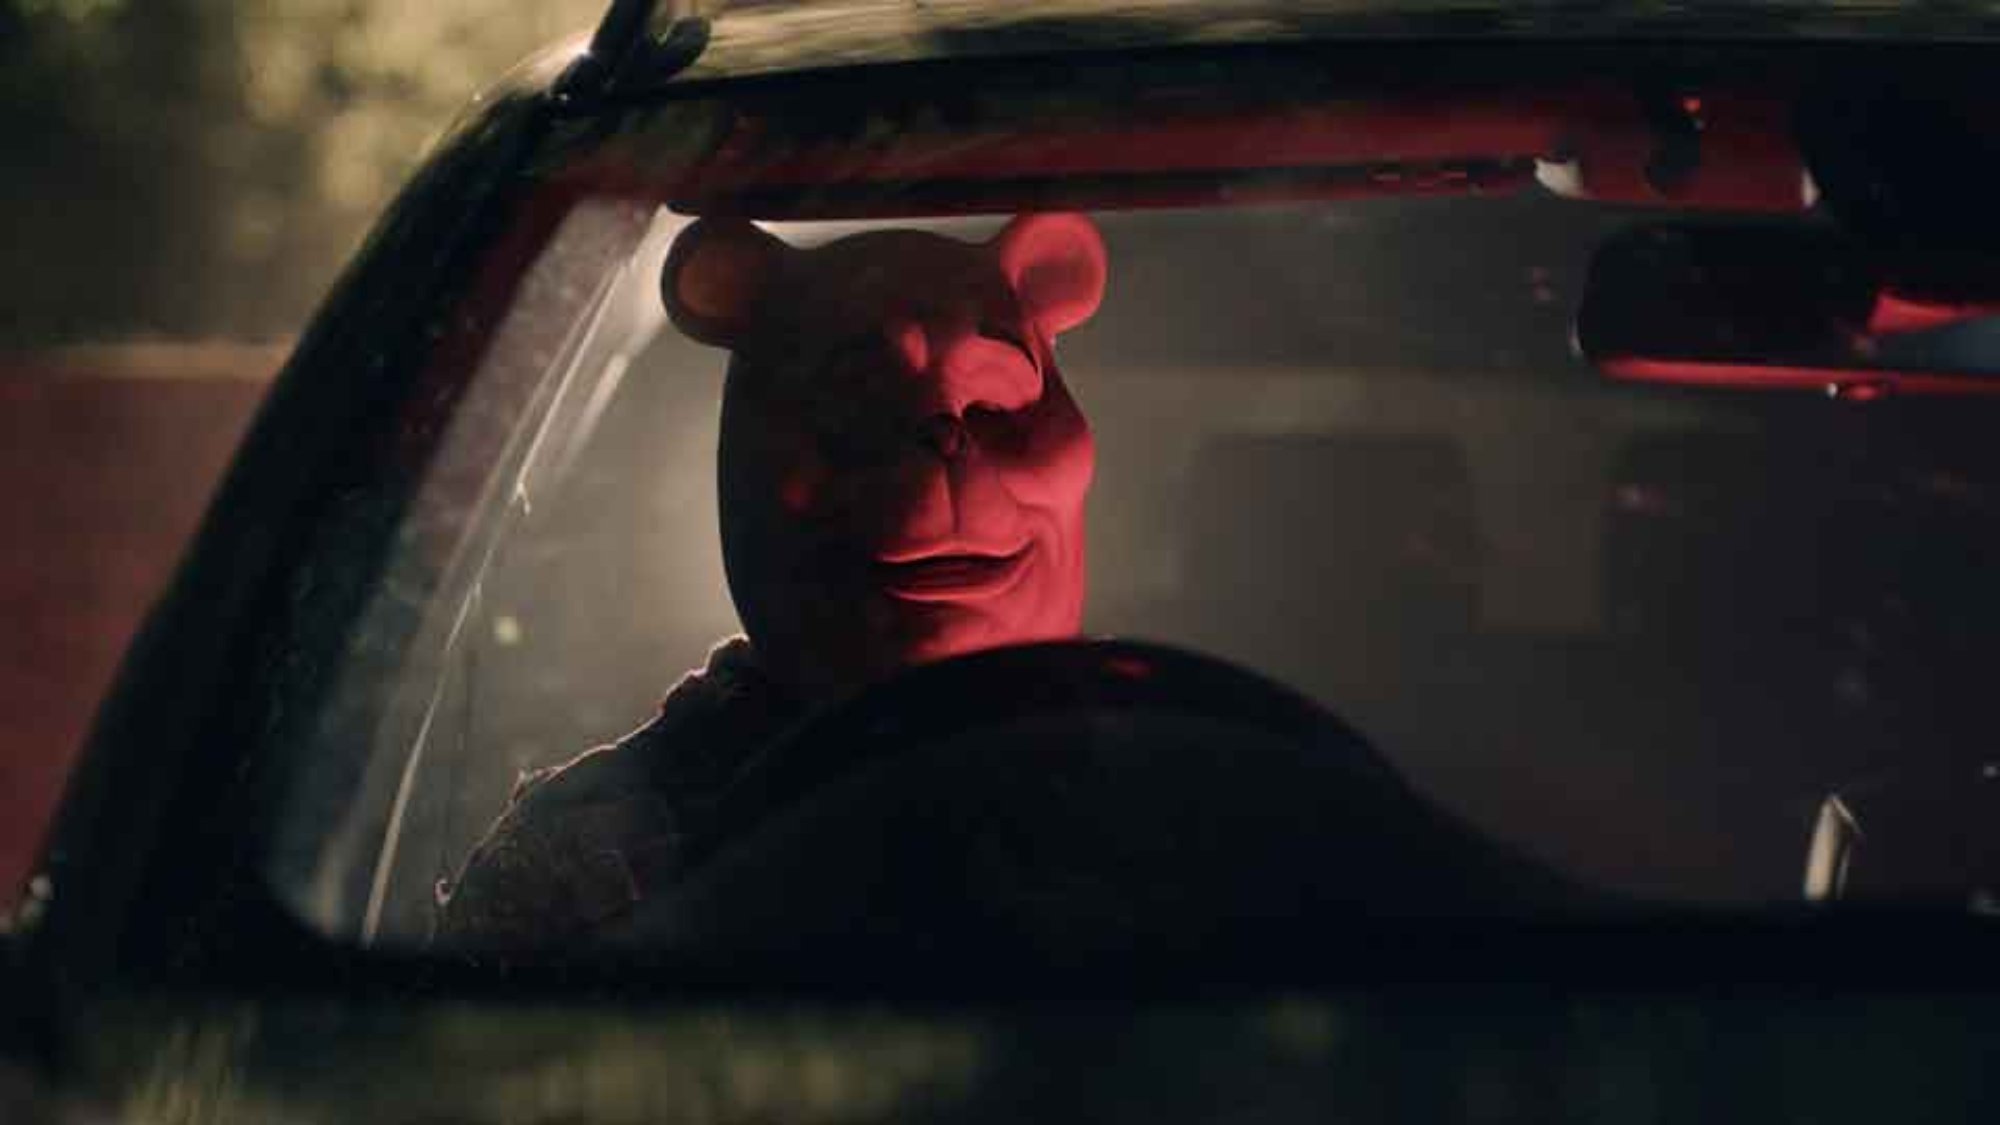 'Winnie the Pooh: Blood and Honey' Craig David Dowsett as Pooh Bear sitting in a car with red lighting